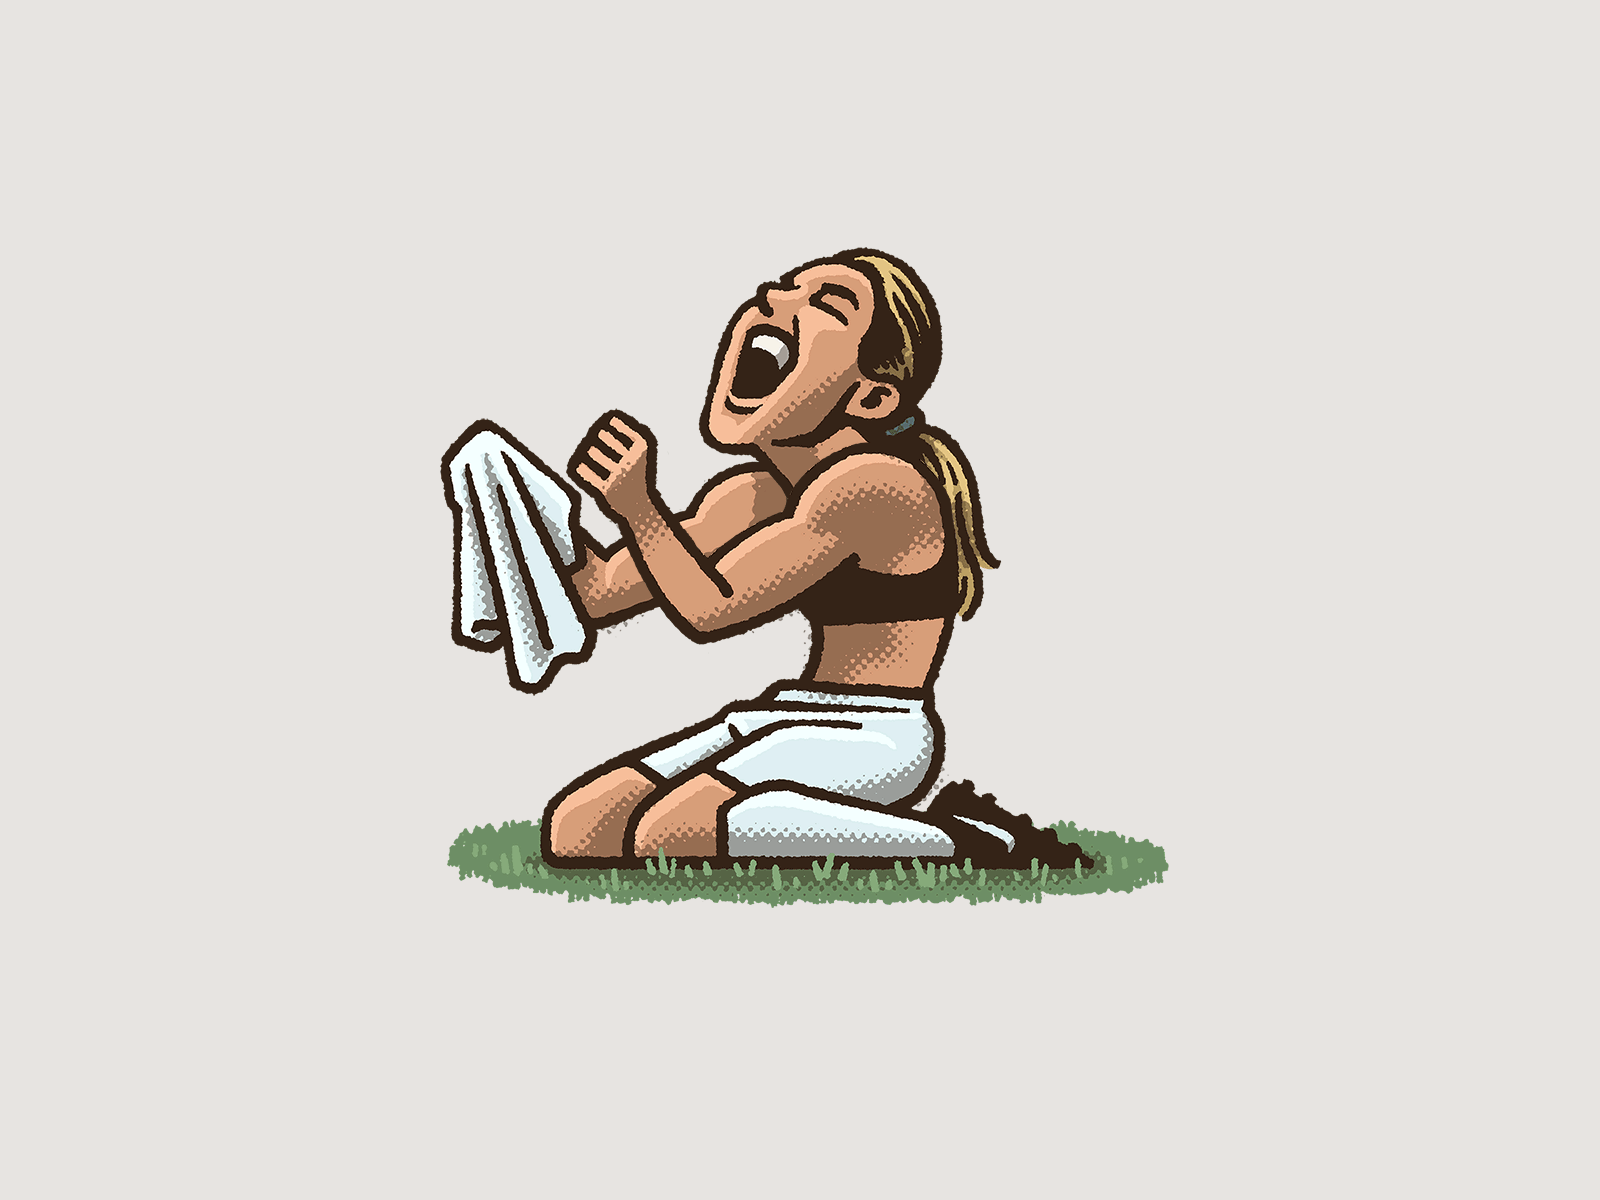 Brandi Chastain S Pk Wins The World Cup By Mario Zucca On Dribbble